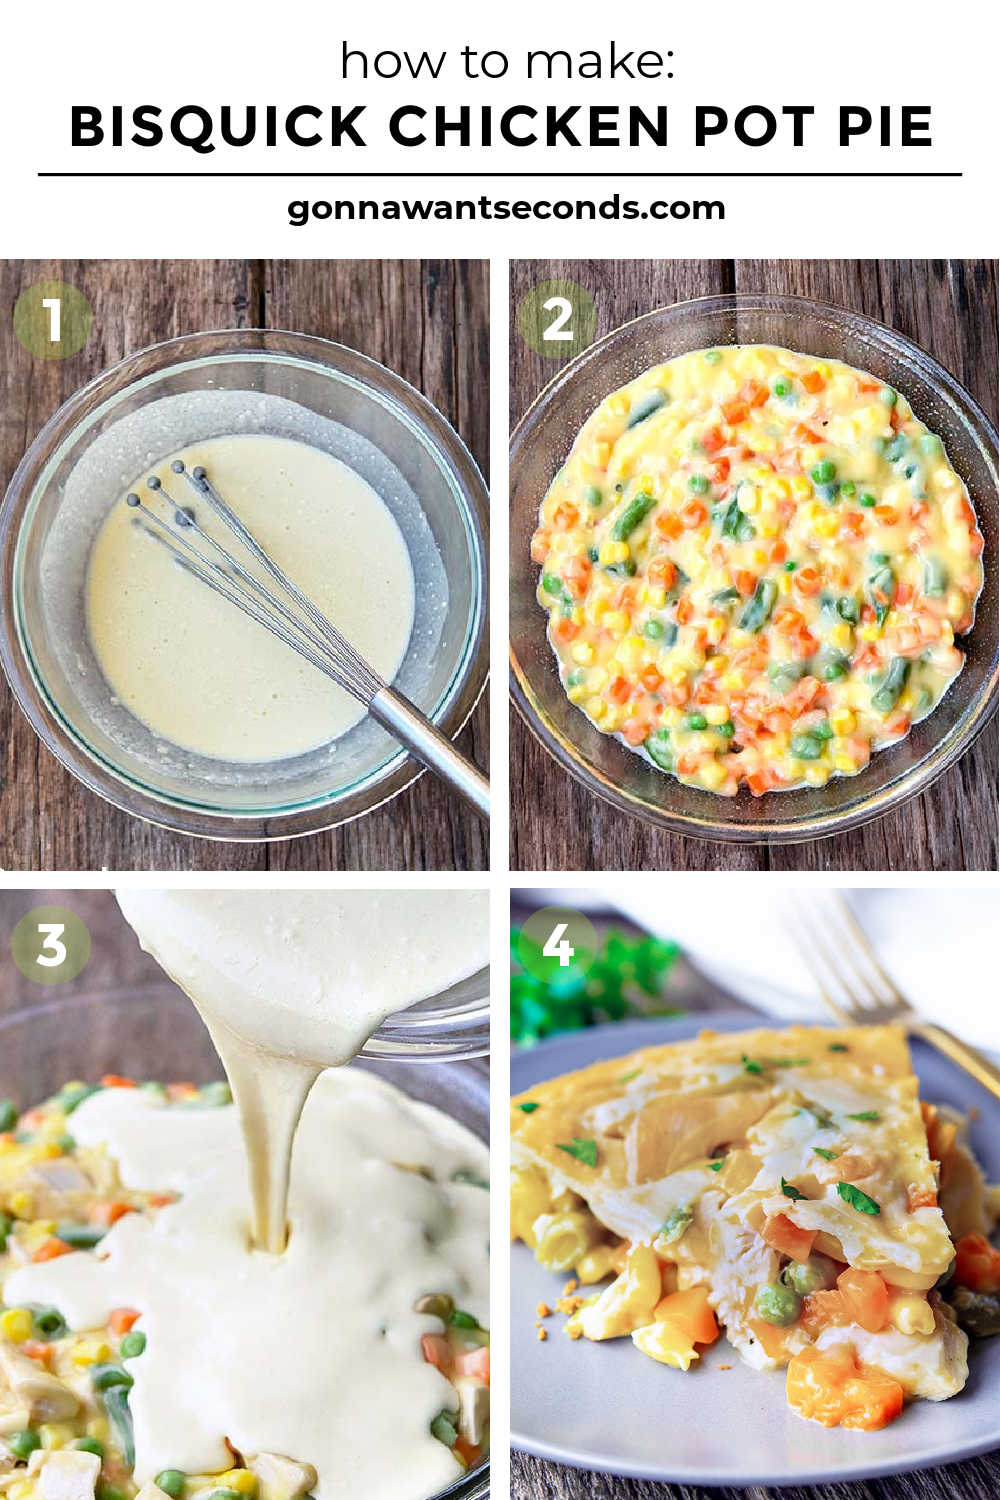 Step by step how to make Bisquick Chicken Pot Pie